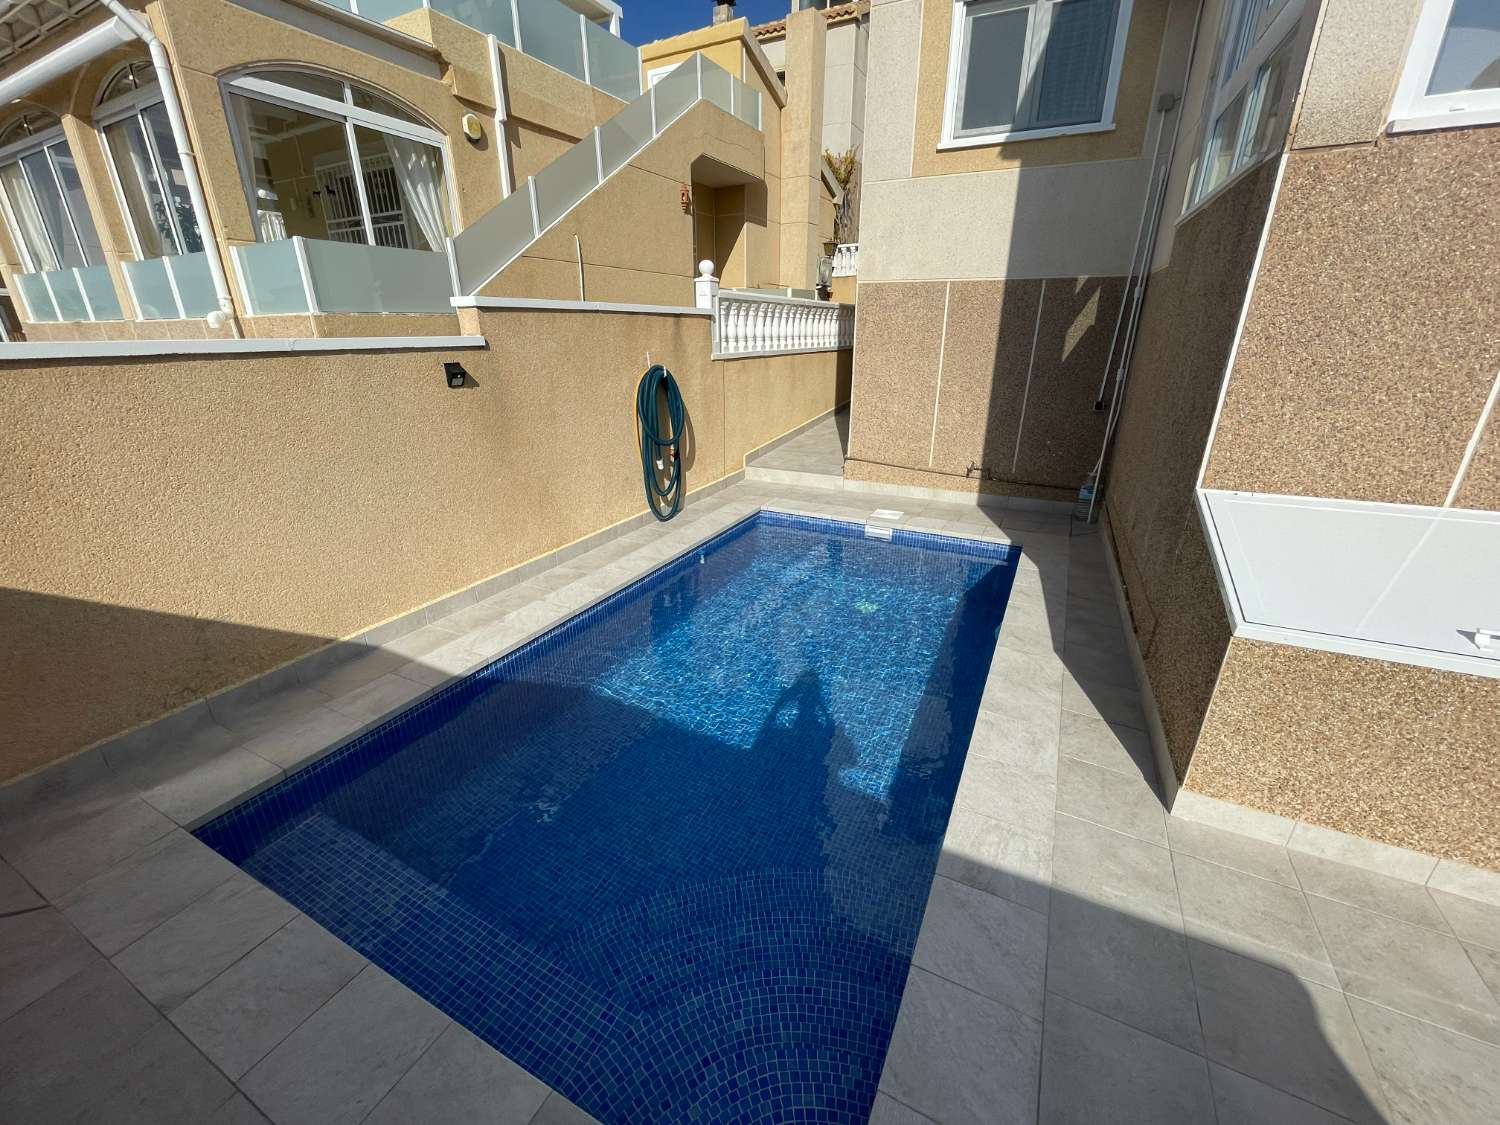 Beautifully renovated 3 bedroom 2 bathroom detached villa with private pool.